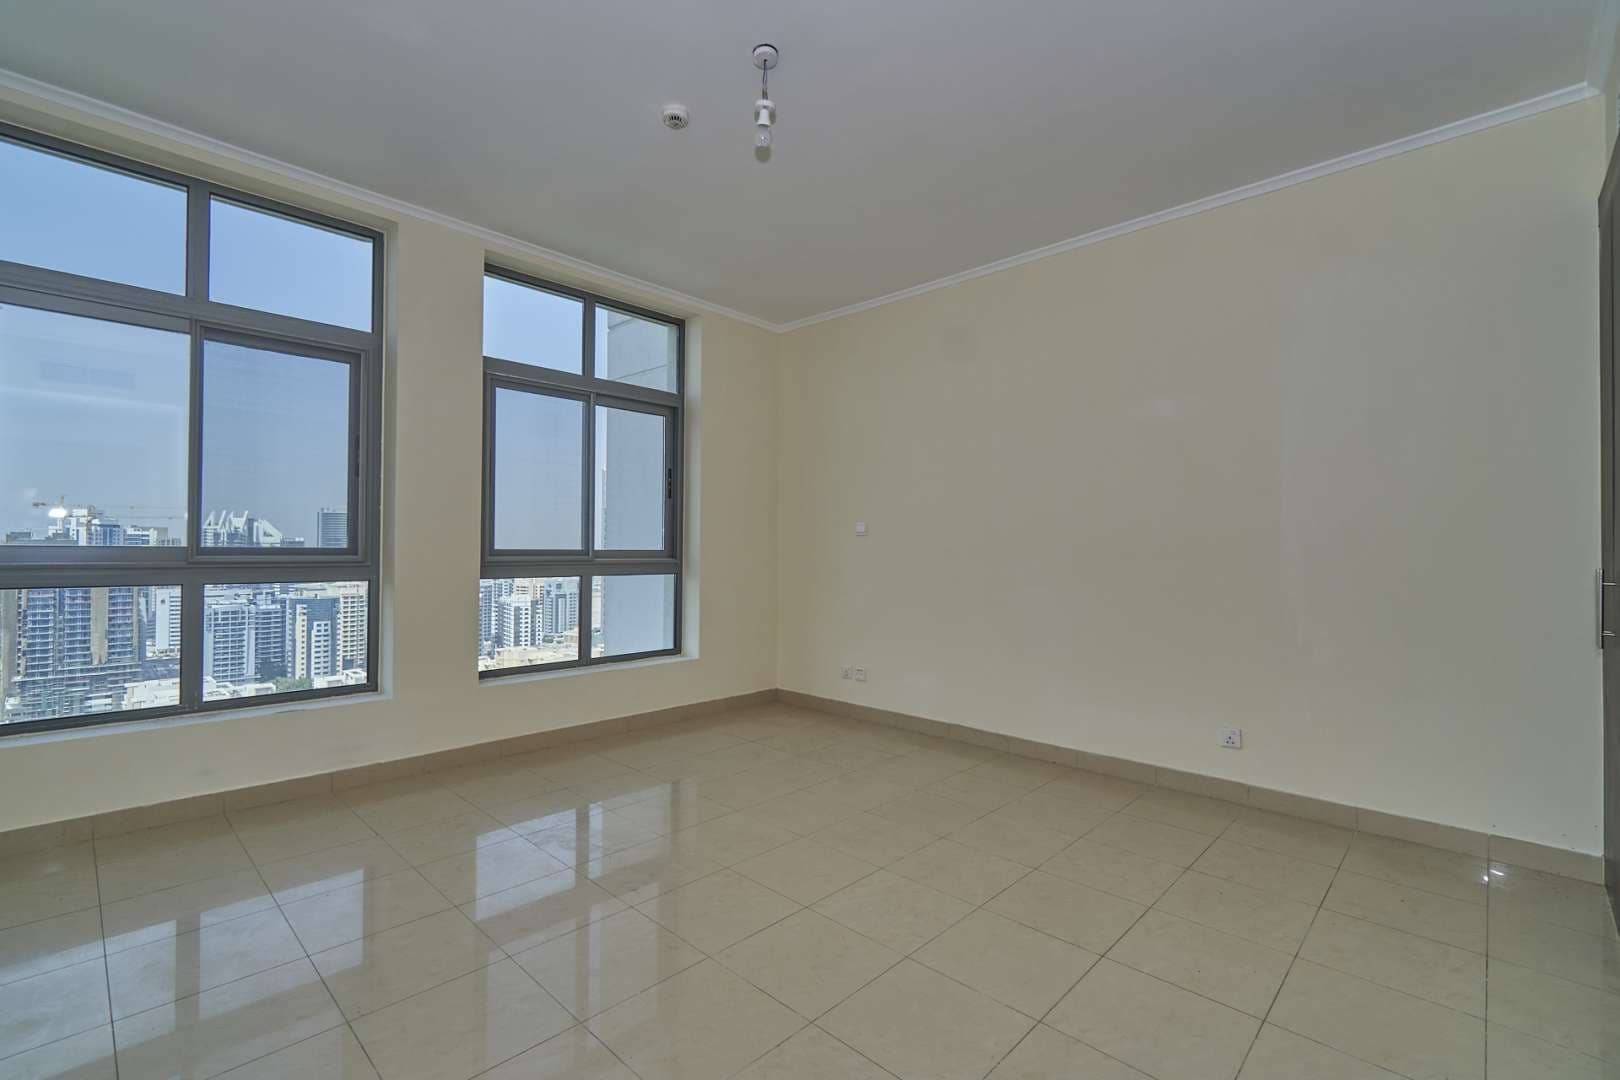 2 Bedroom Apartment For Rent The Links West Tower Lp07314 Cc47bb760f76480.jpg